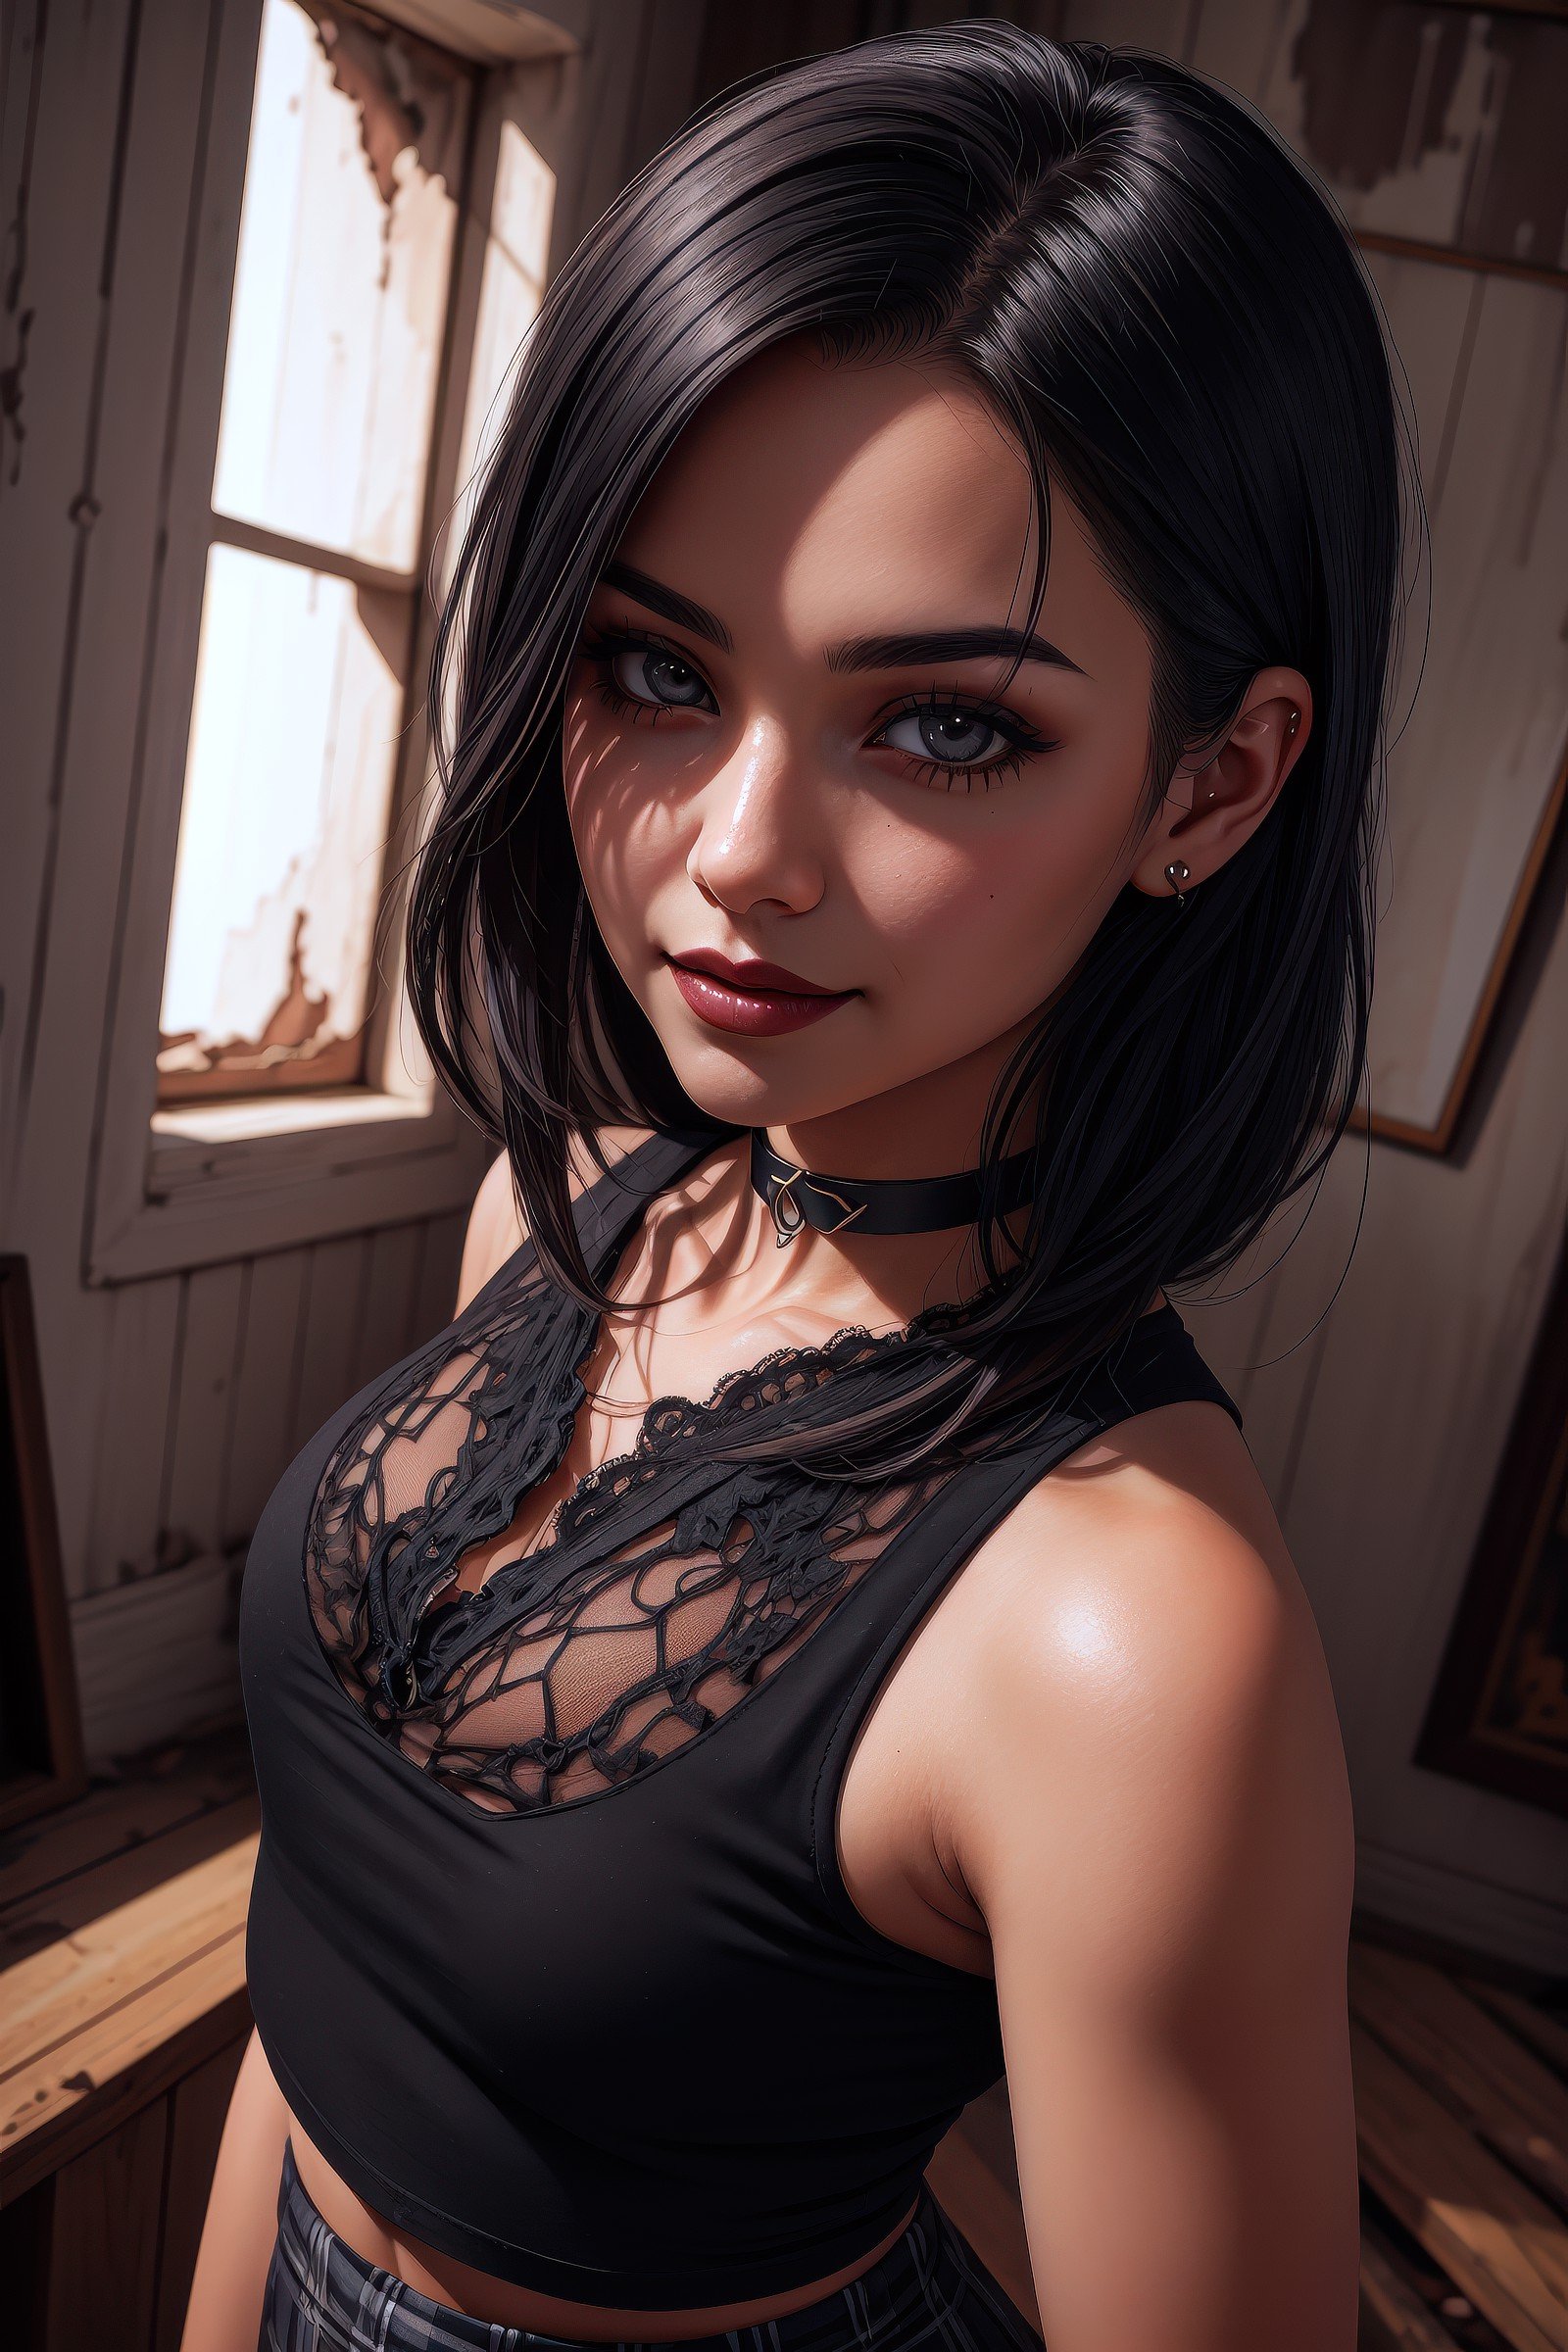 sumptuously detailed painting, goth girl, (unconventional black hair), black tank top, black plaid skirt, black choker, smirking, flirty pose, flesh details, accurate flesh composition, extremely detailed background, extremely detailed face capturing every feature, dark, insane detail, meticulous detail, exaggerated realism, macabre, decay, corruption, pale lighting, unearthly lighting, hyperrealism, eerie